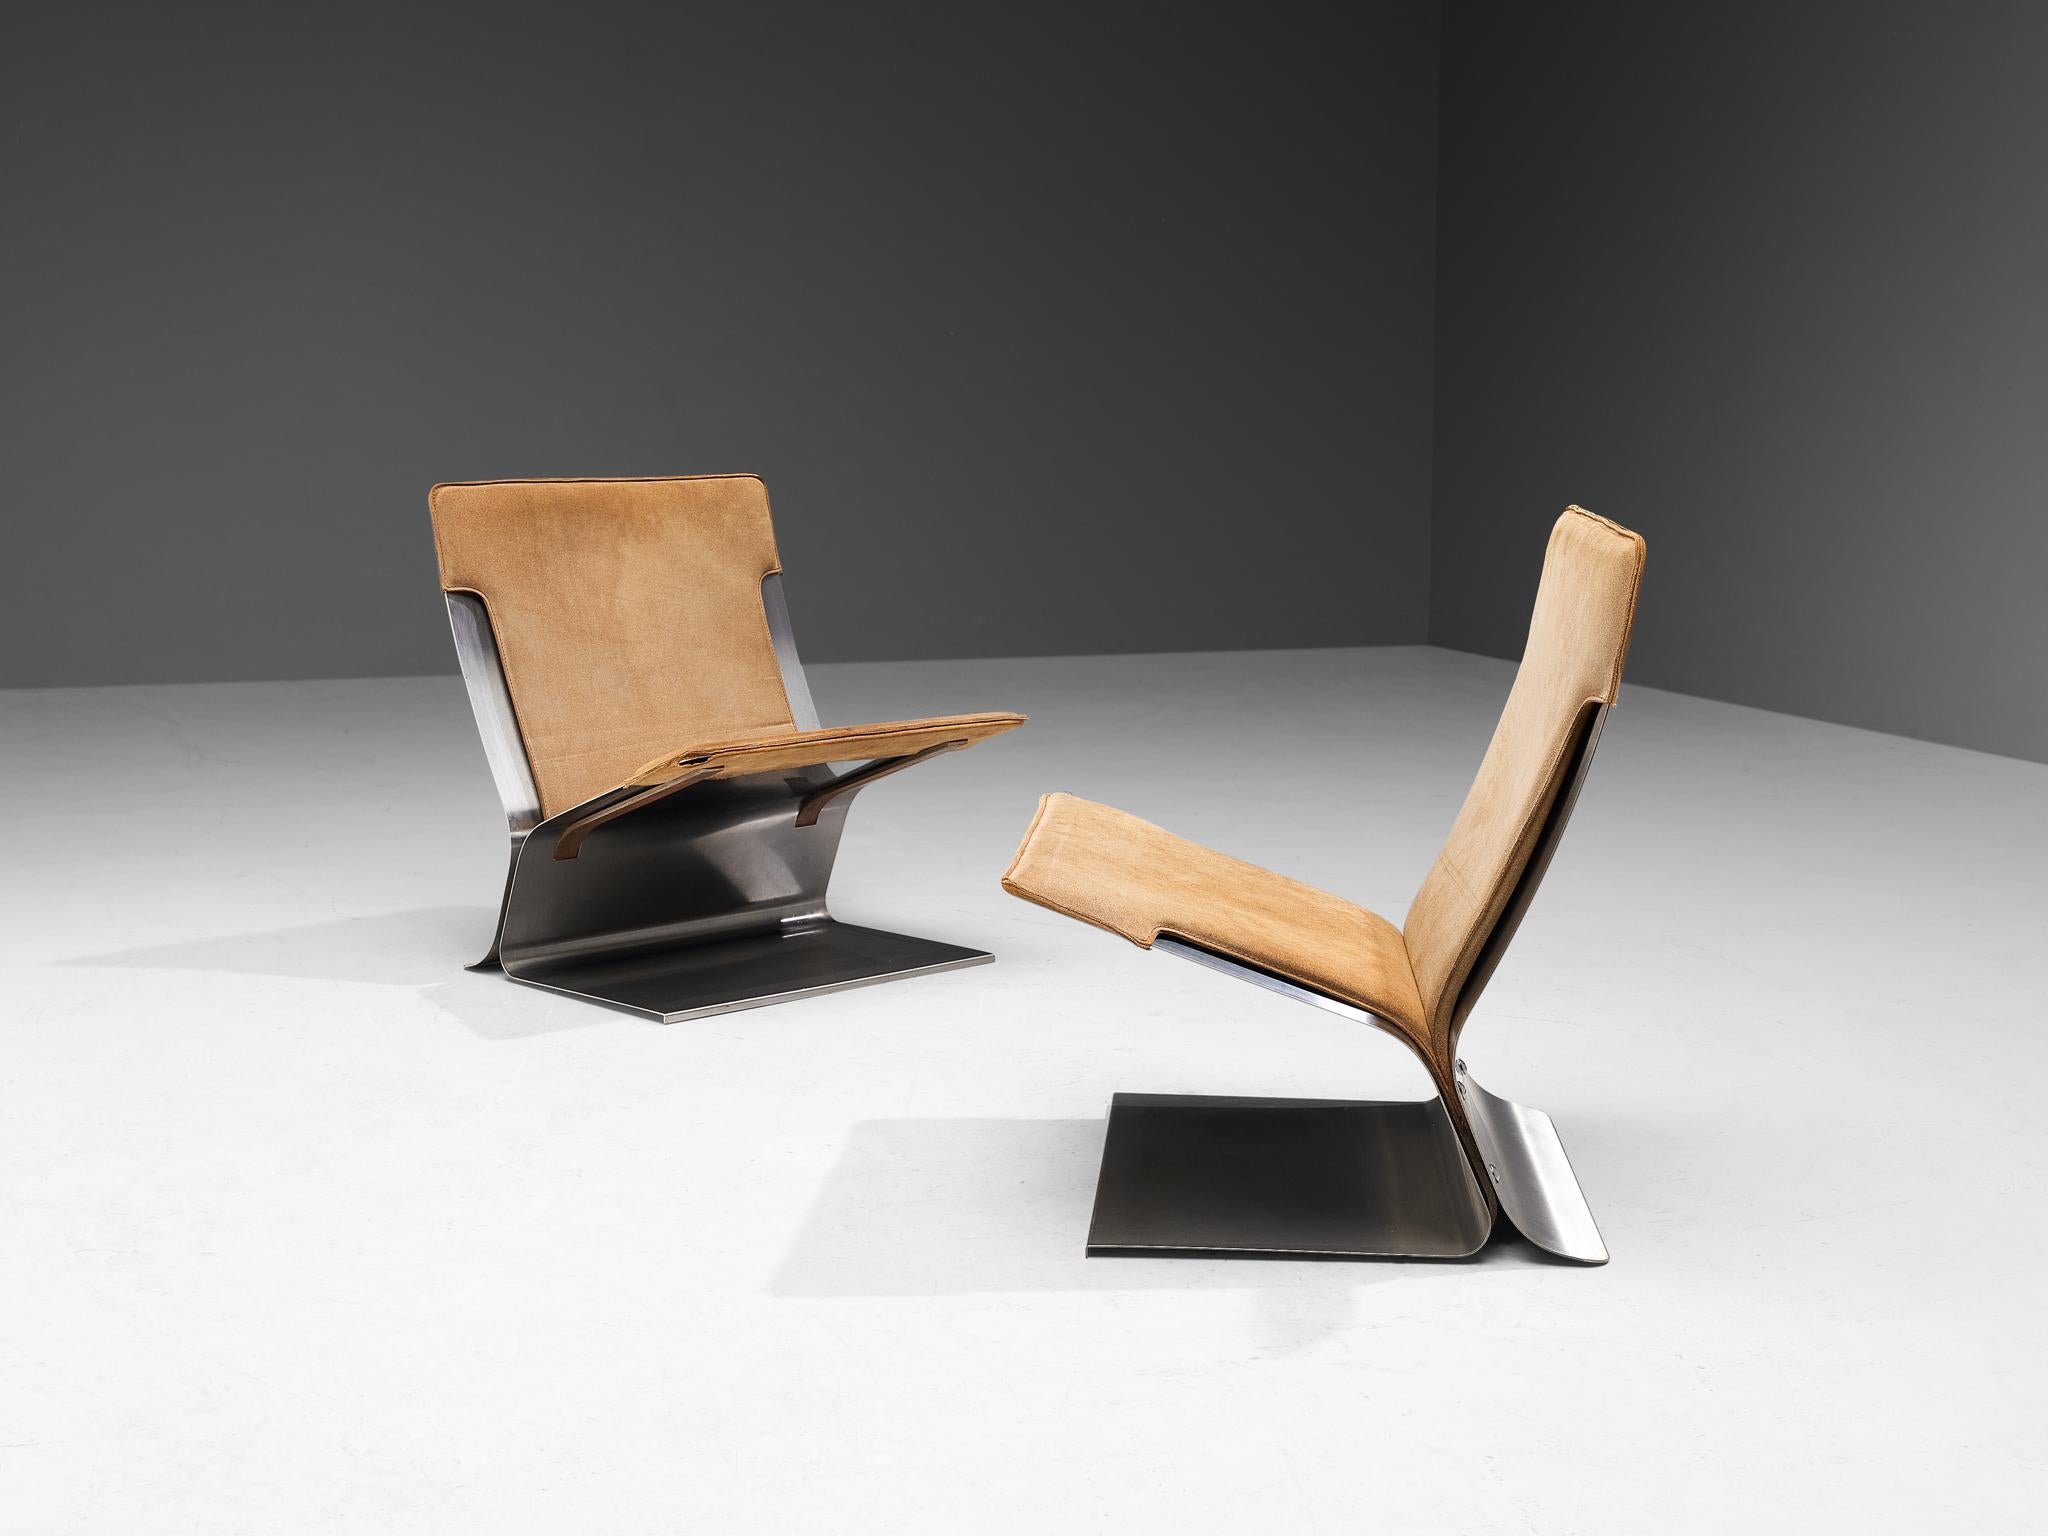 Pierre Folie for Jacques Charpentier, pair of 'Chauffeuse' lounge chairs, suede, stainless steel, France, circa 1973

Throughout the sixties and seventies, French designers experimented with the elasticity of stainless steel, among others Michel